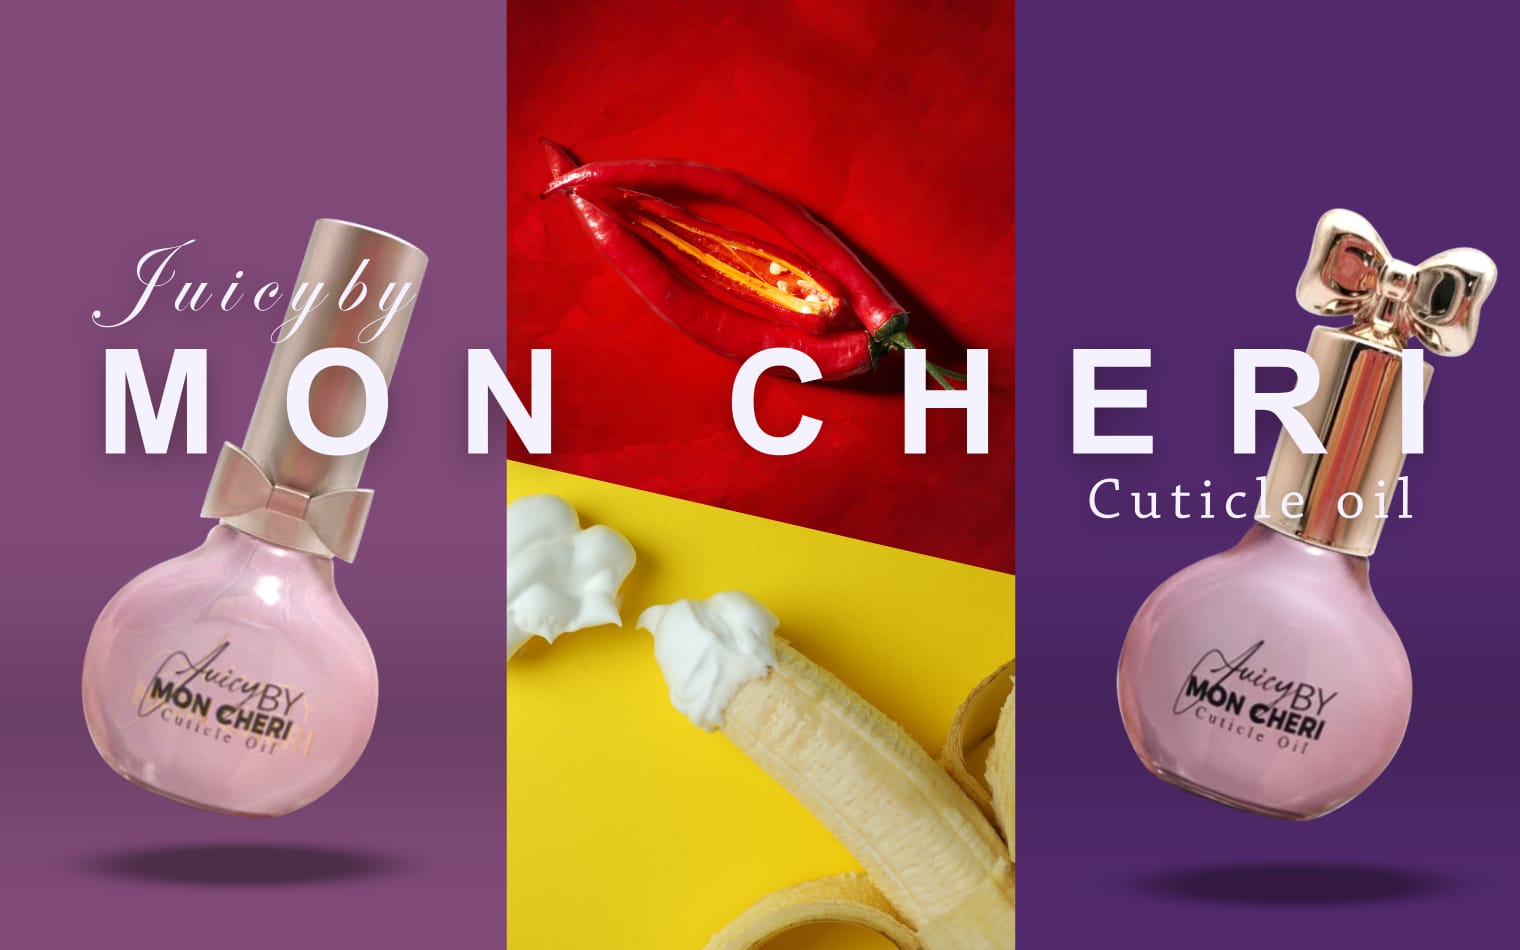 Soothing Red Hot Banana Cuticle Oil by Juicy By Mon Cheri